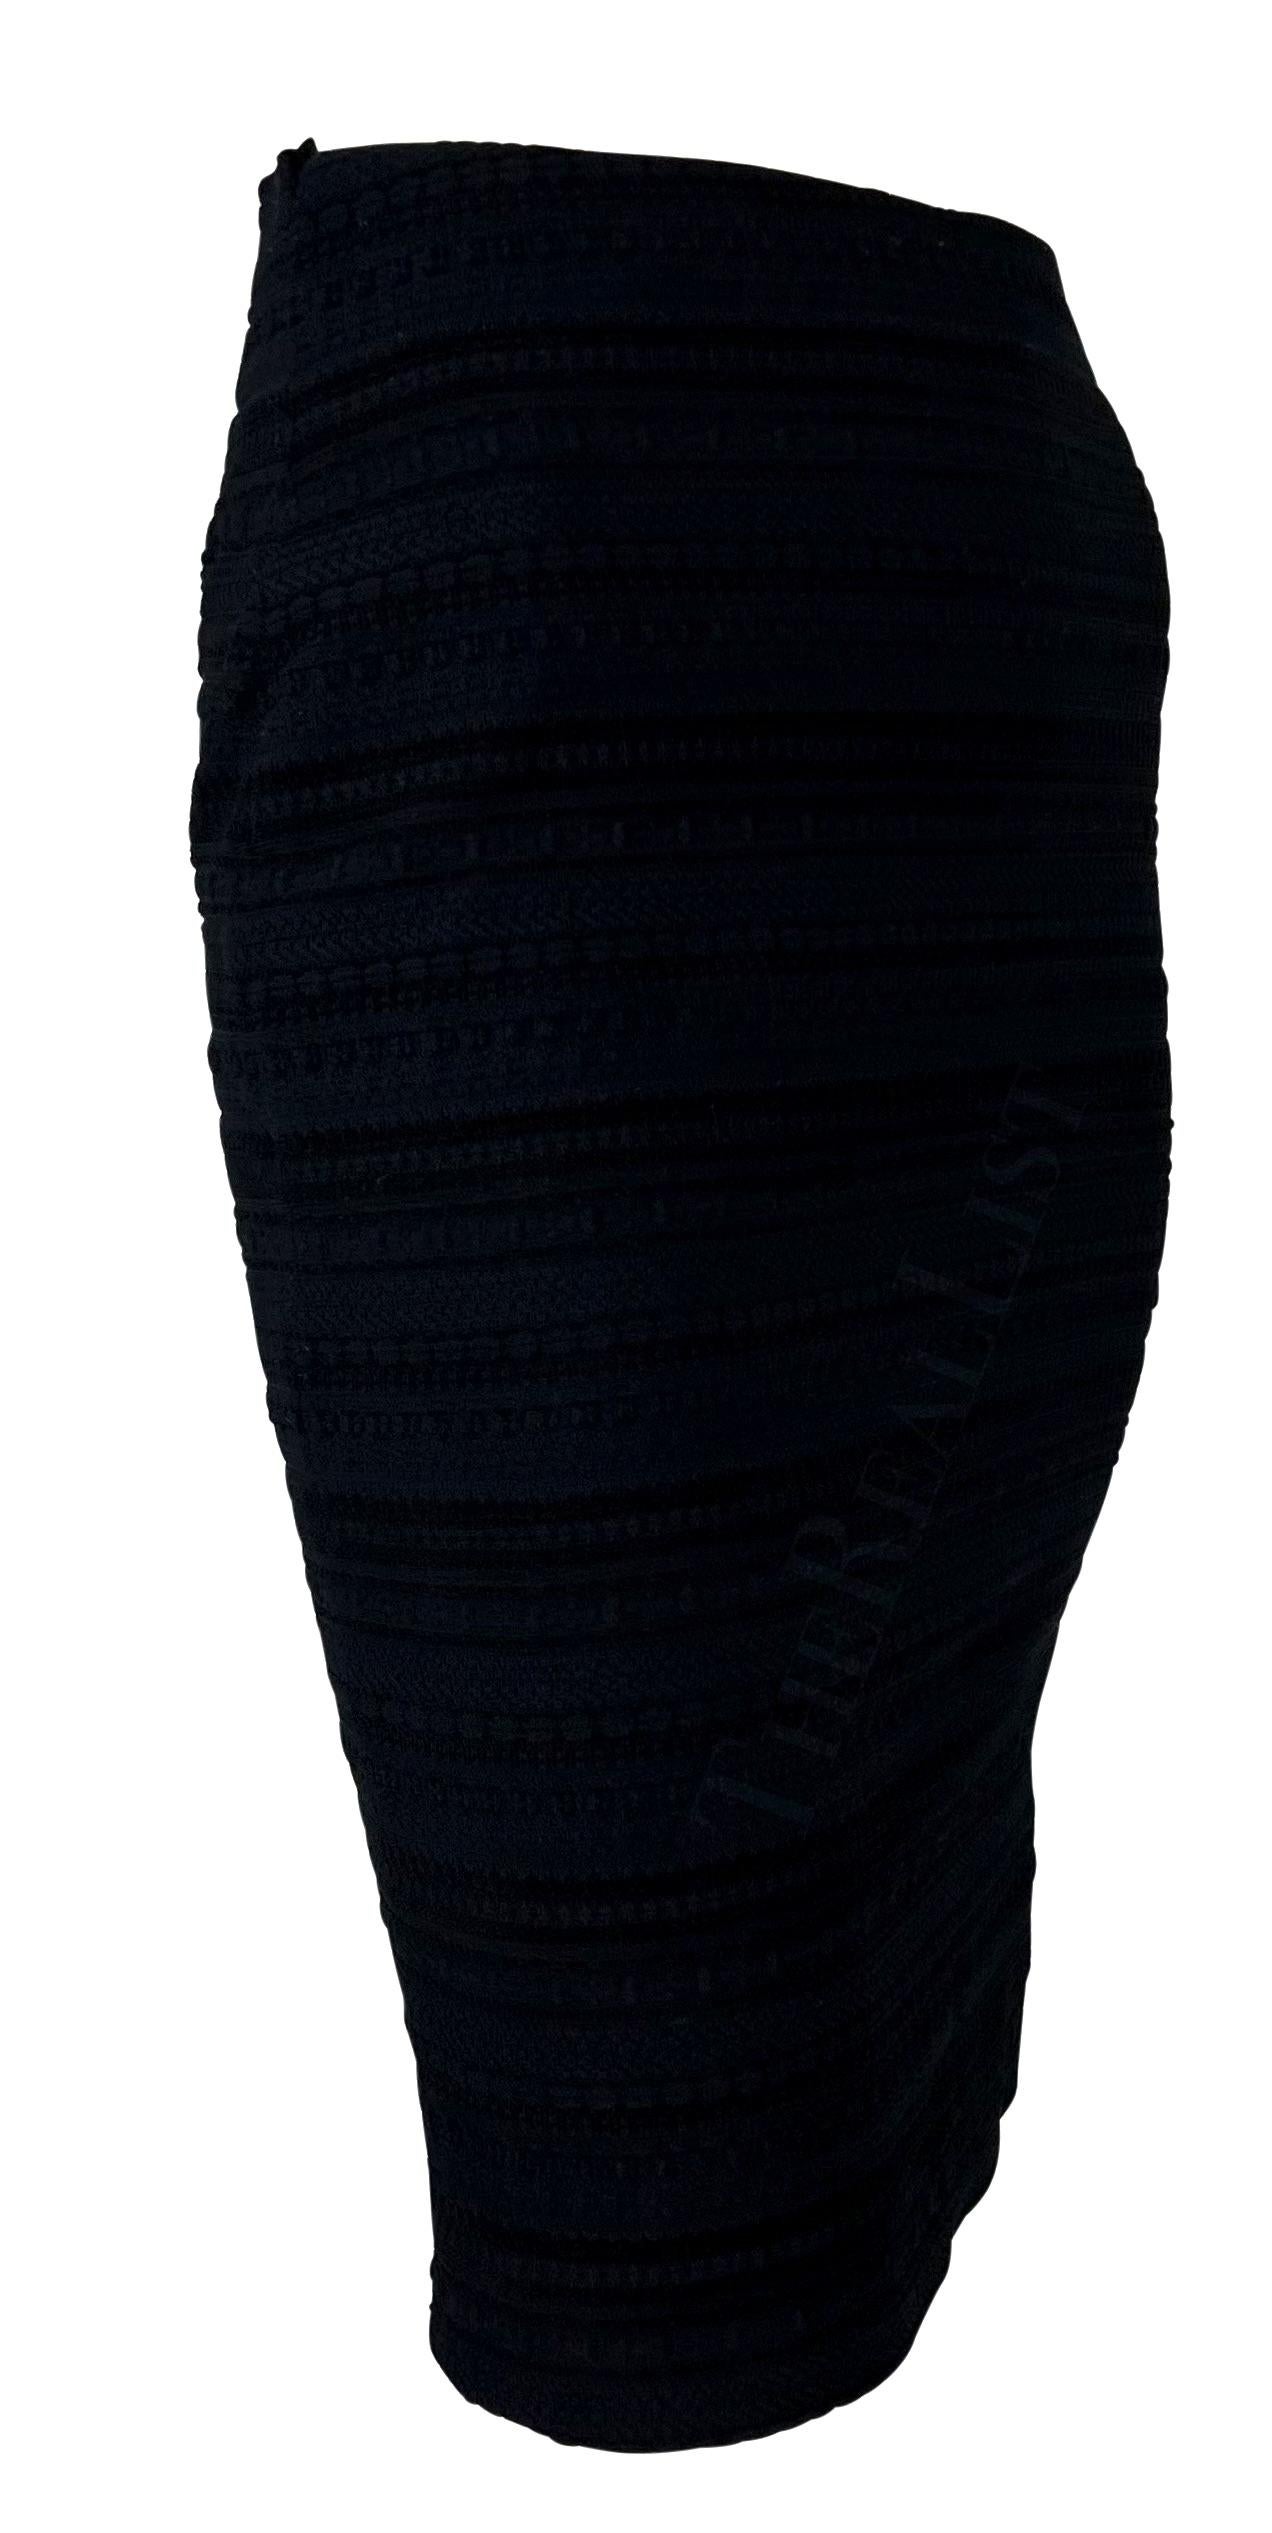 Late 1990s Dolce & Gabbana Black Textured Knit Woven Bodycon Pencil Skirt For Sale 2